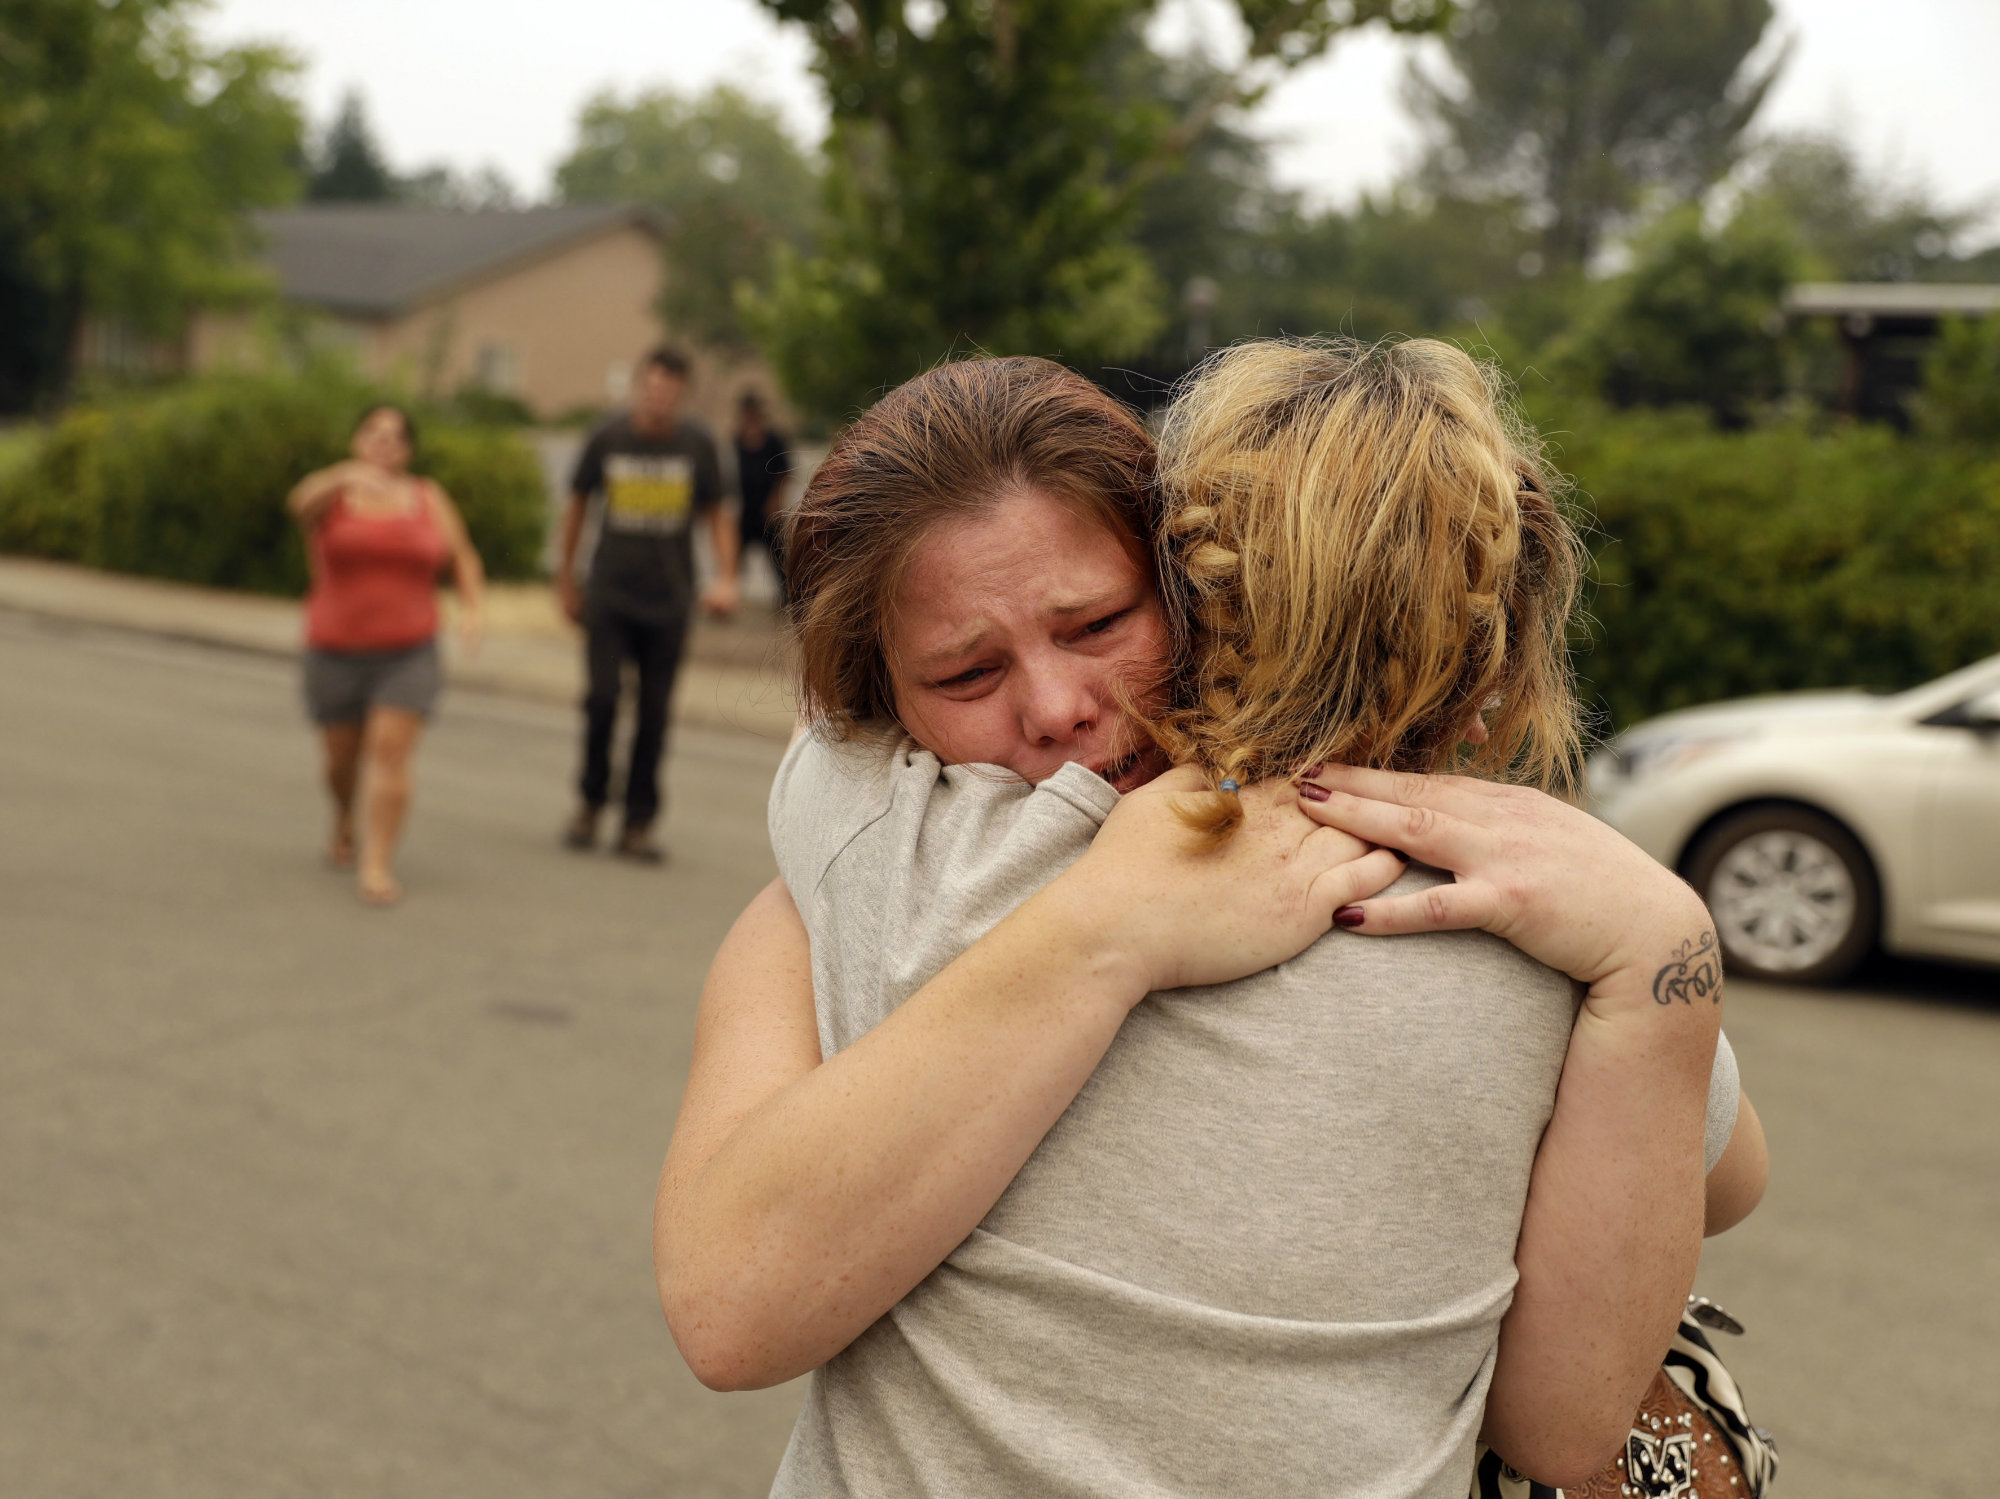 Carla Bledsoe, facing camera, hugs her sister Sherry outside of the sheriff's office after hearing news that Sherry's children, James and Emily, and grandmother, Melody Bledsoe, were killed in a wildfire Saturday, July 28, 2018, in Redding, Calif.